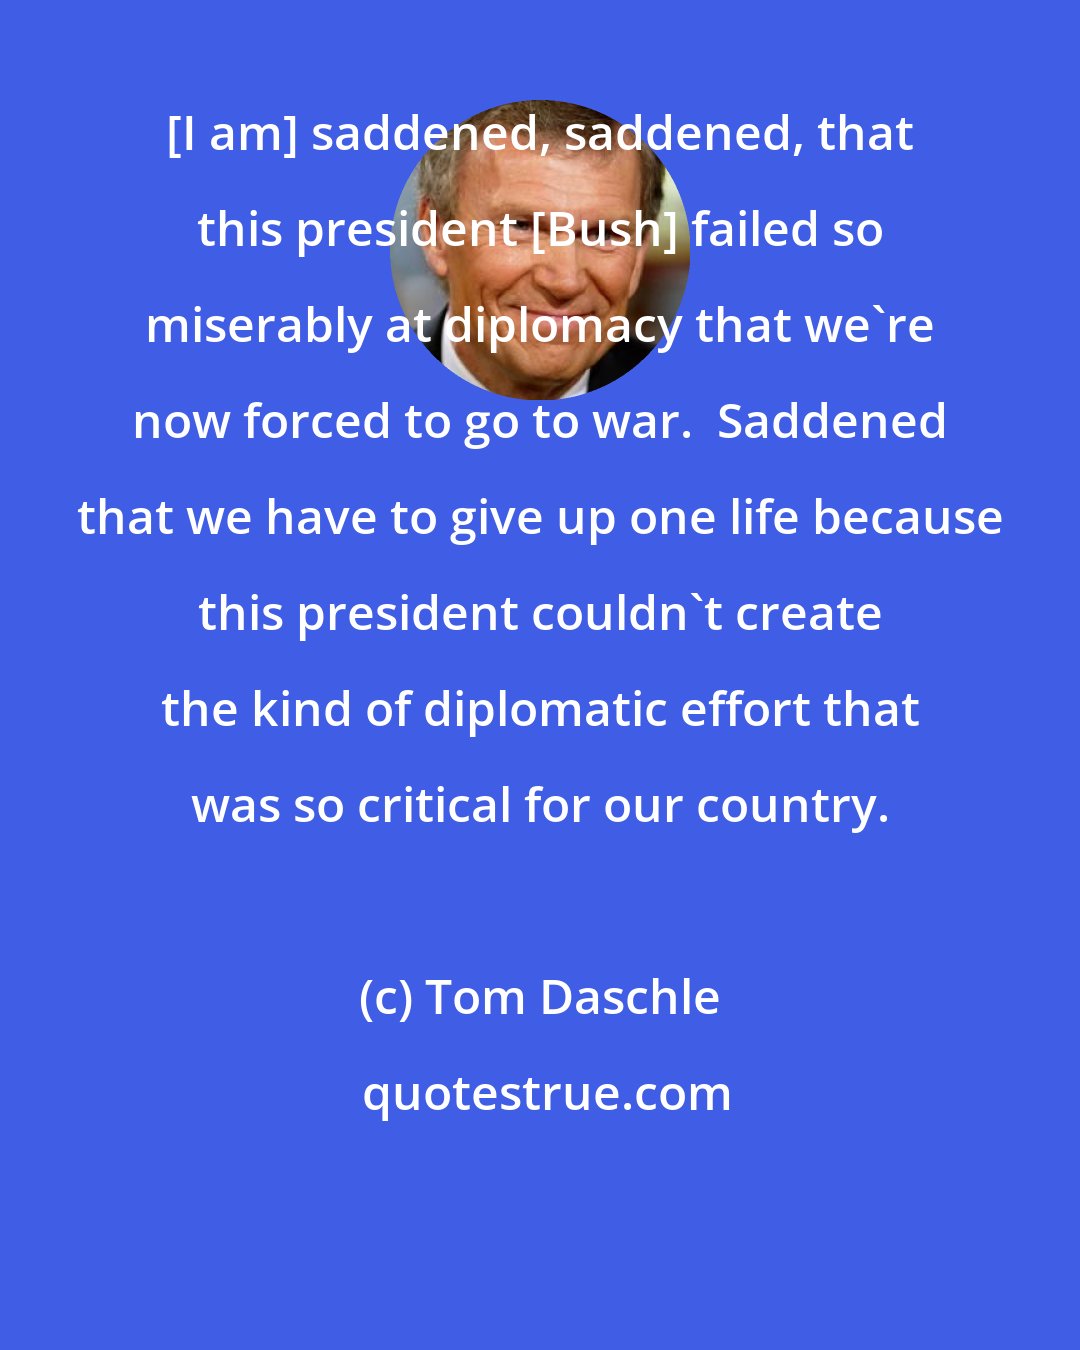 Tom Daschle: [I am] saddened, saddened, that this president [Bush] failed so miserably at diplomacy that we're now forced to go to war.  Saddened that we have to give up one life because this president couldn't create the kind of diplomatic effort that was so critical for our country.